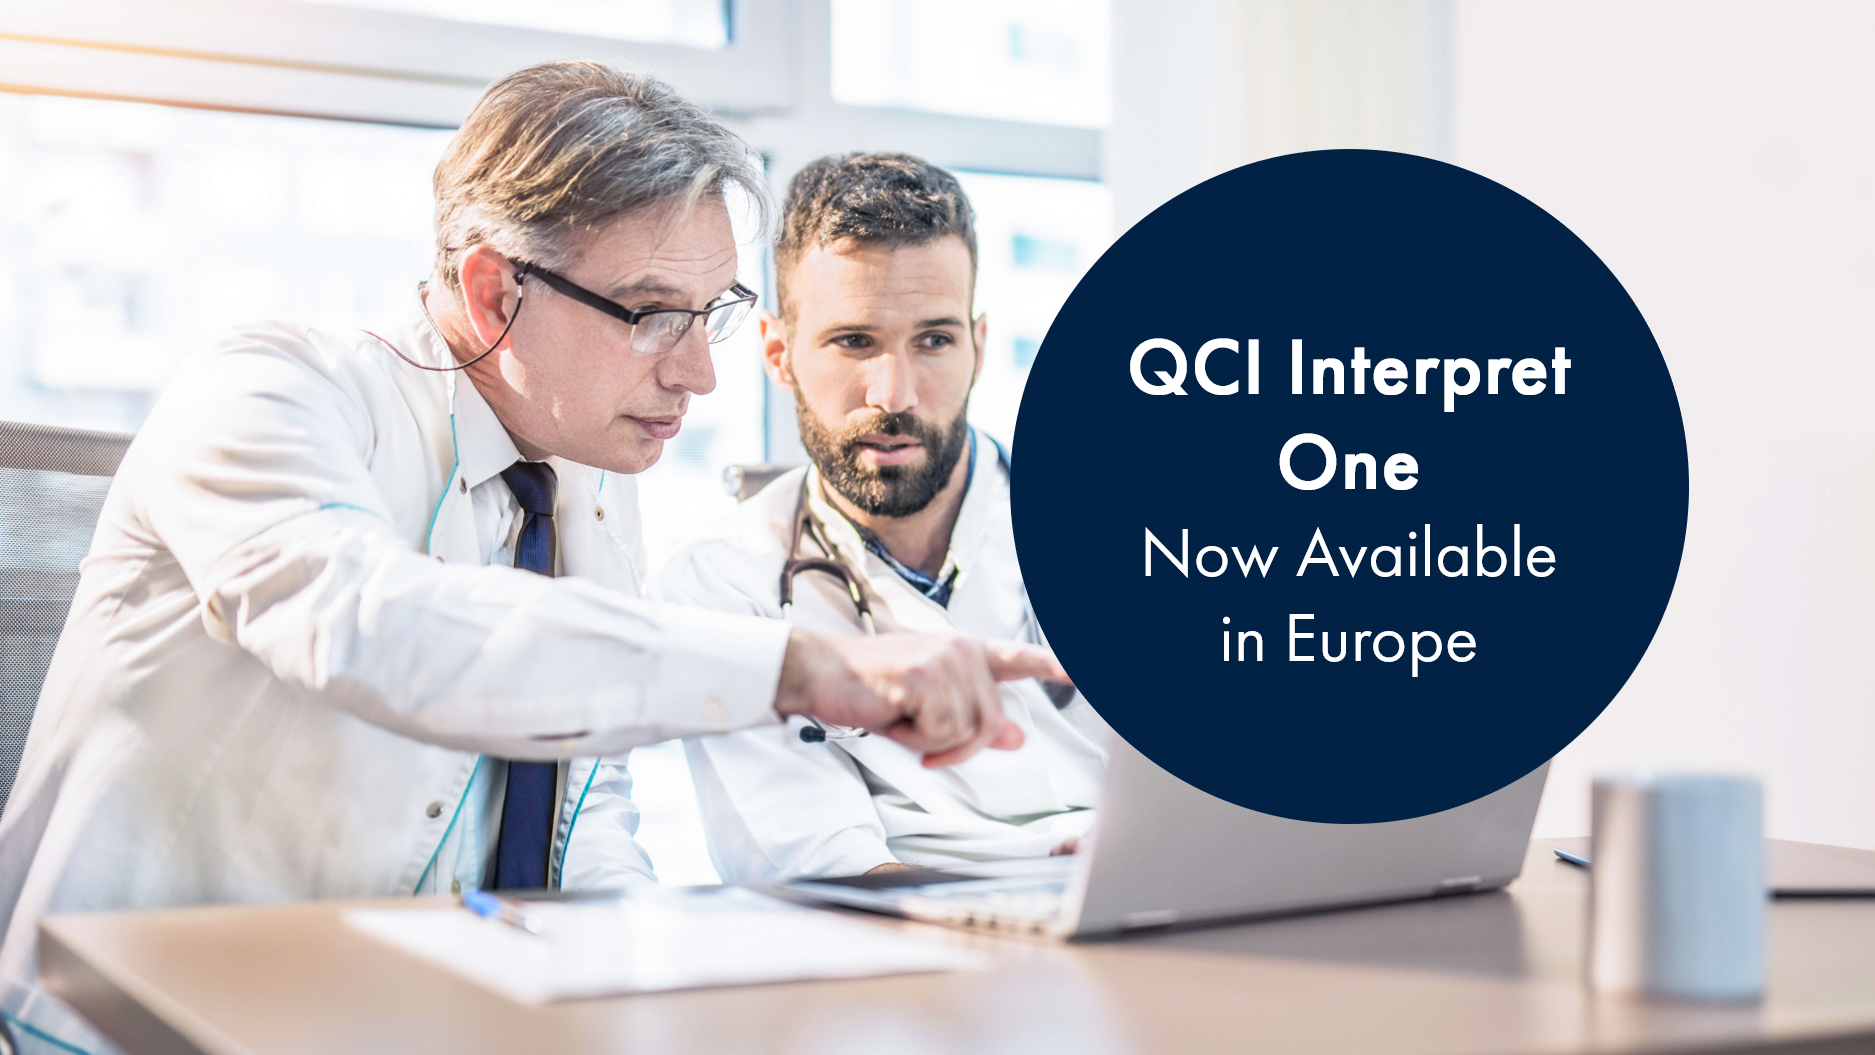 QCI Interpret One is now available in Europe